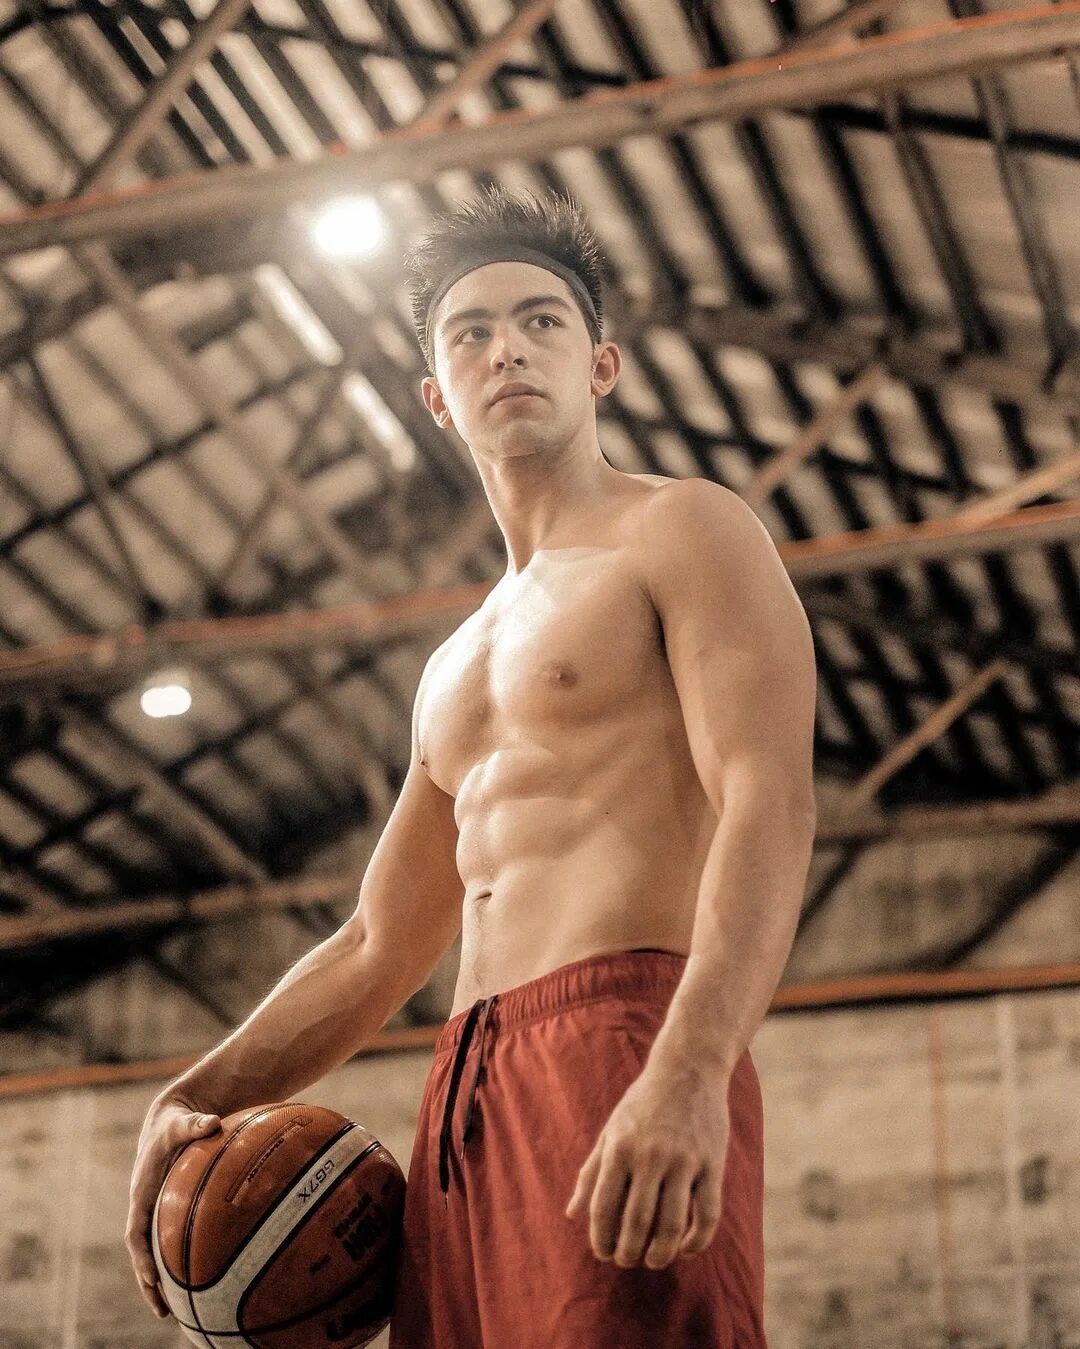 Derrick Monasterio в Instagram: "Not all ballers are players, would yo...